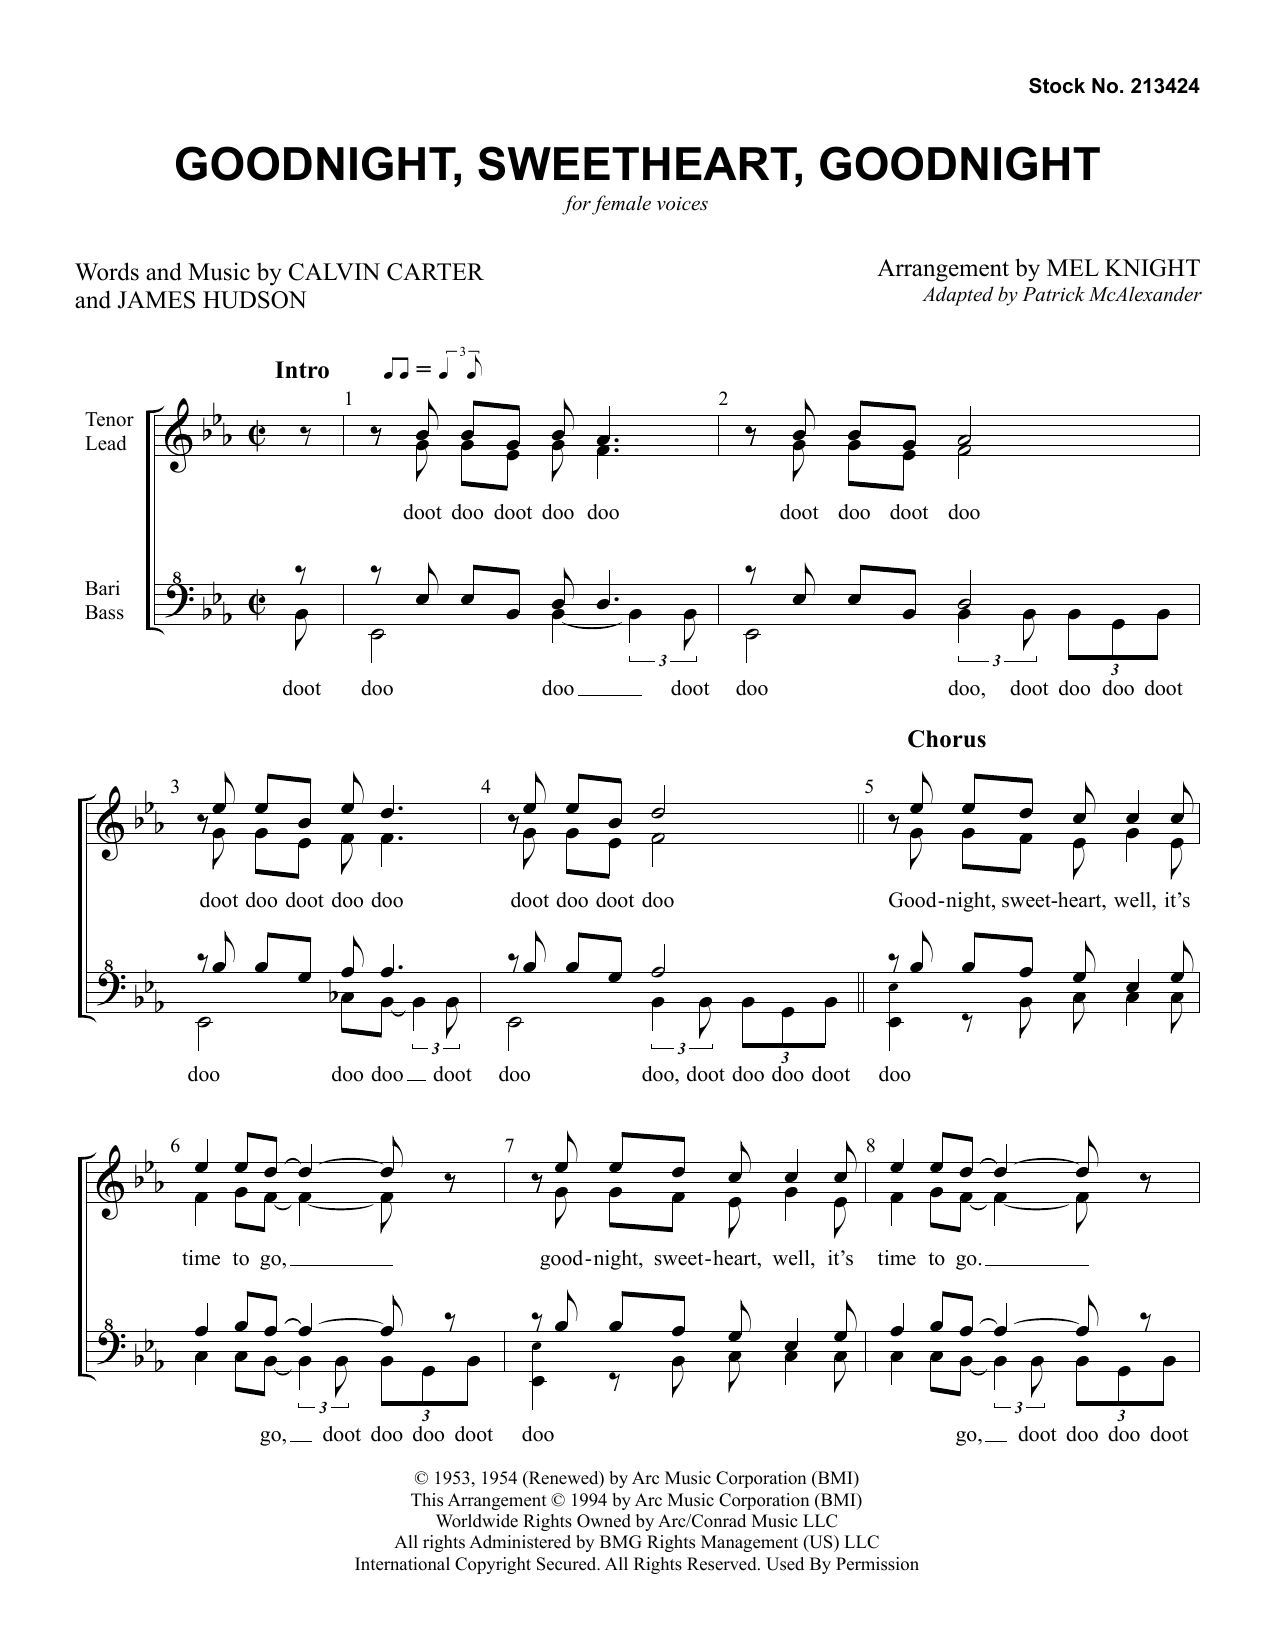 Download The McGuire Sisters Goodnight, Sweetheart, Goodnight (arr. Sheet Music